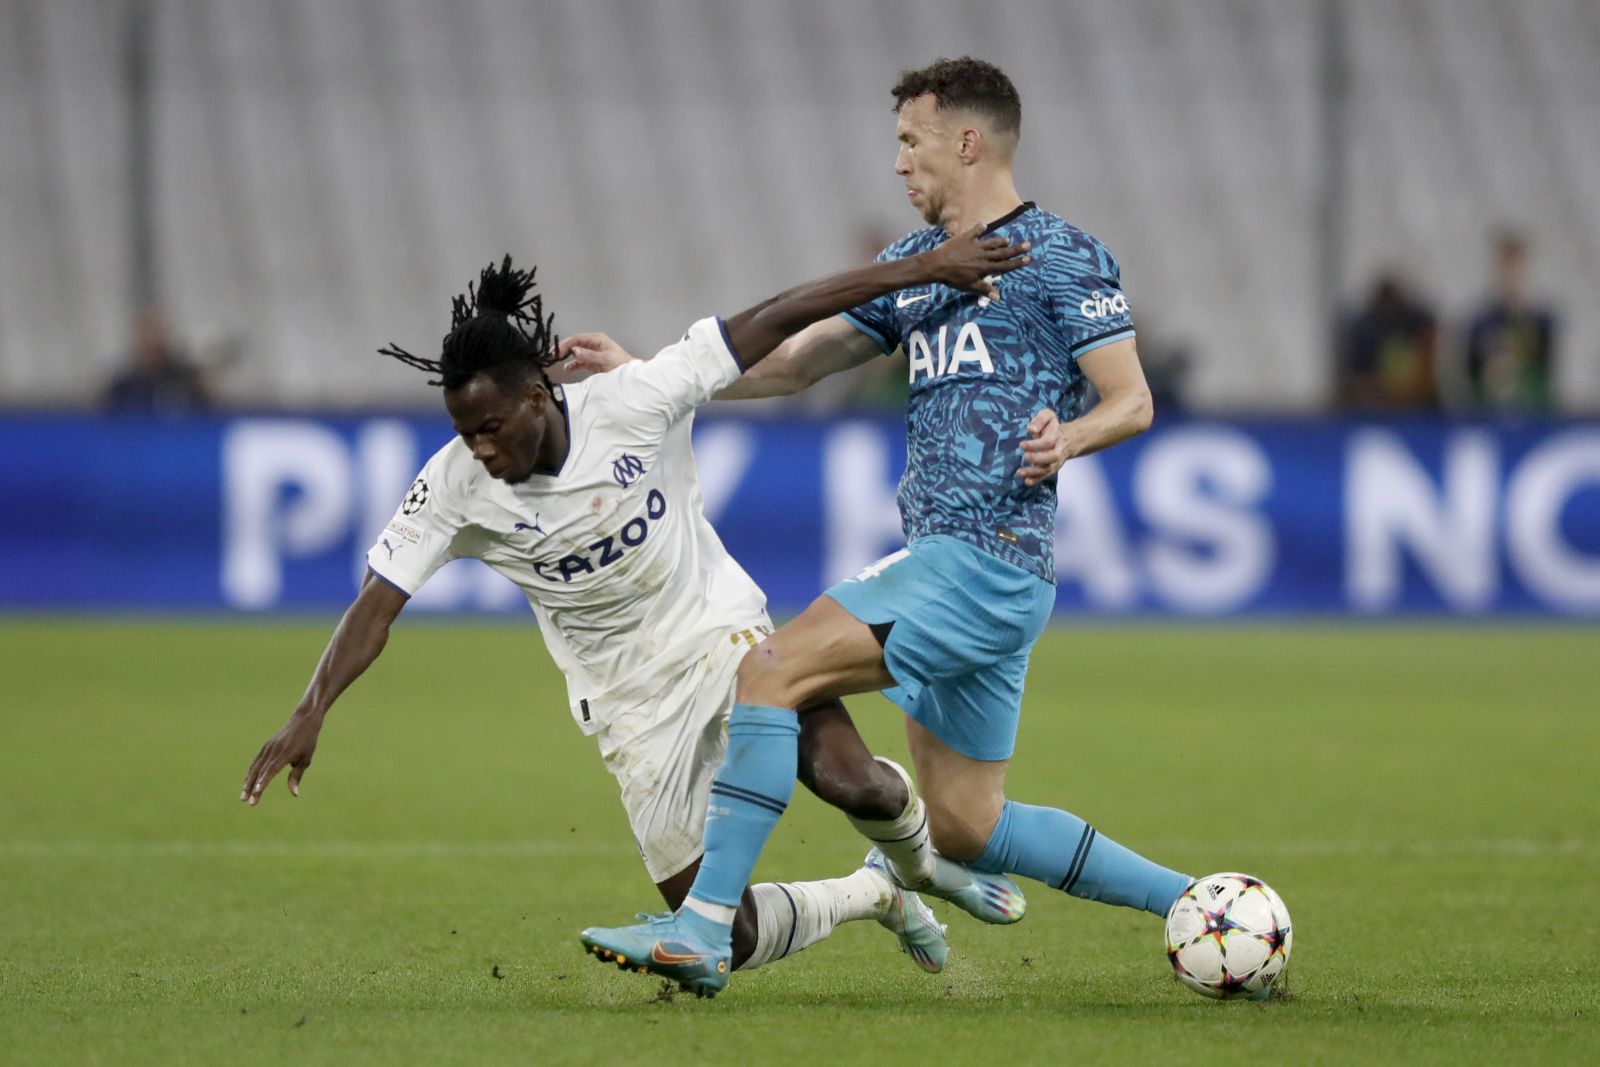 epa10280225 Marseille's Issa Kabore (L) and Tottenham's Ivan Perisic (R) in action during the UEFA Champions League group D soccer match between Olympique Marseille and Tottenham Hotspur, in Marseille, France, 01 November 2022.  EPA/GUILLAUME HORCAJUELO